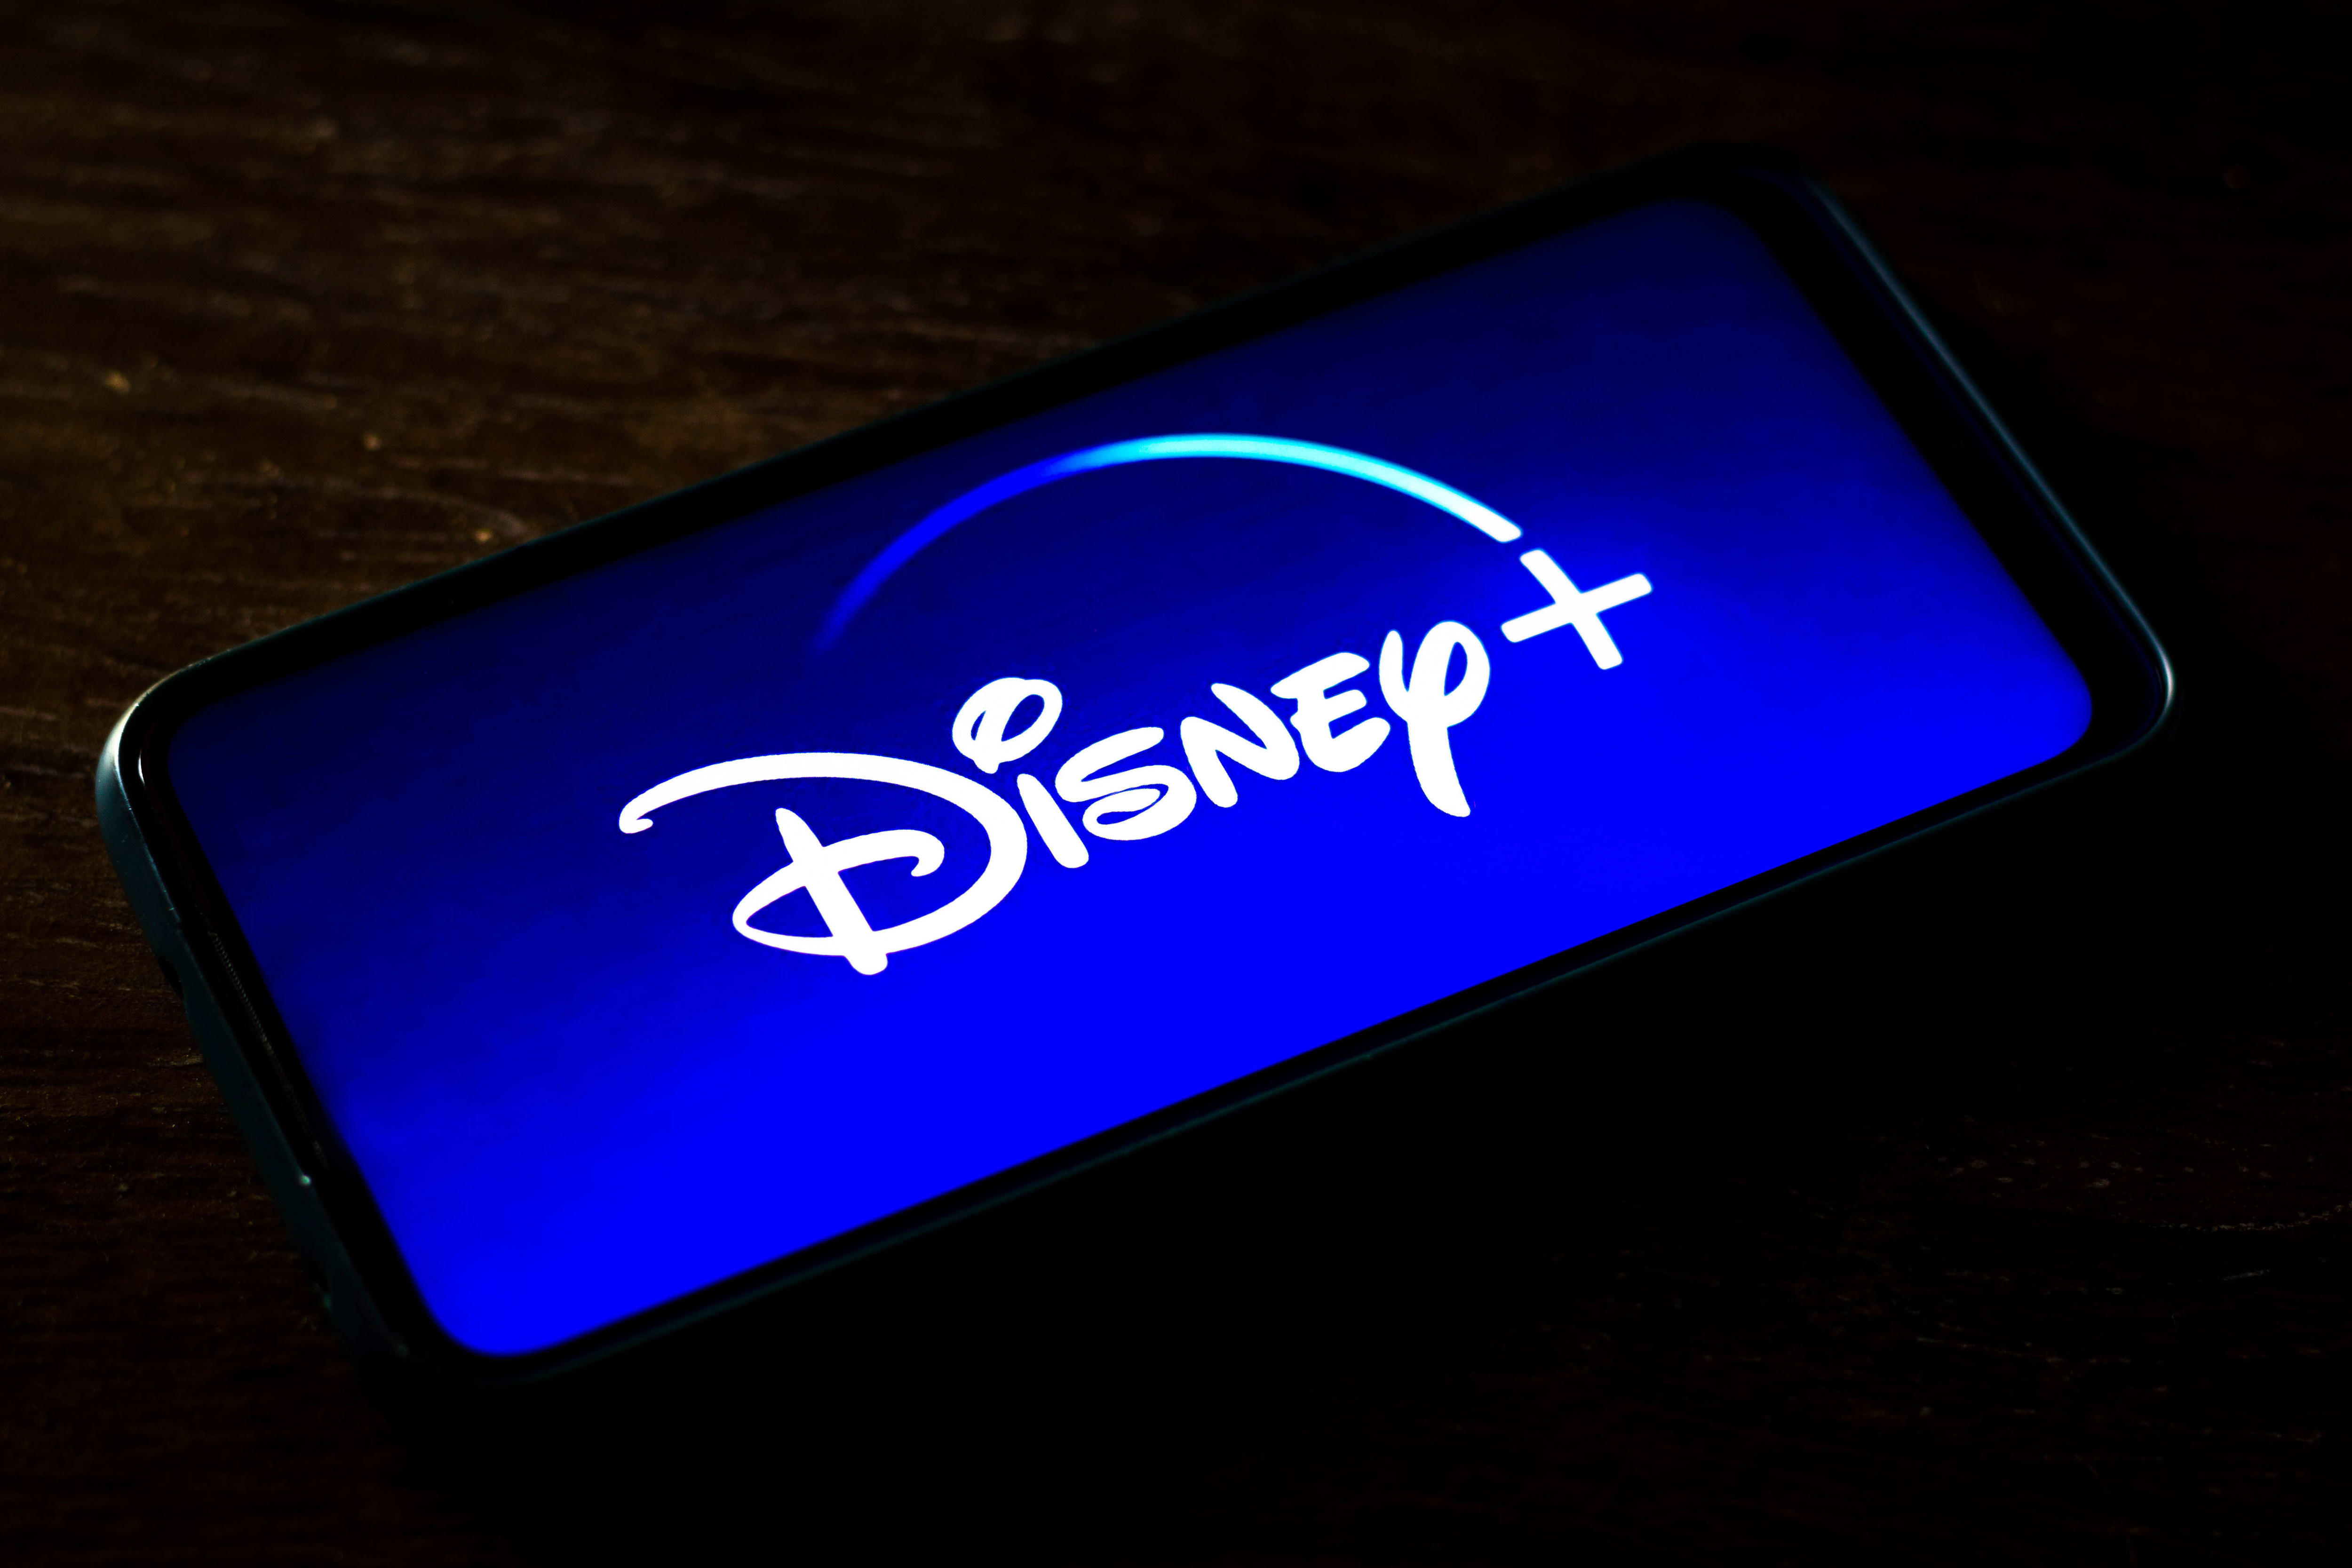 Disney forms international content group, gears up for streaming push